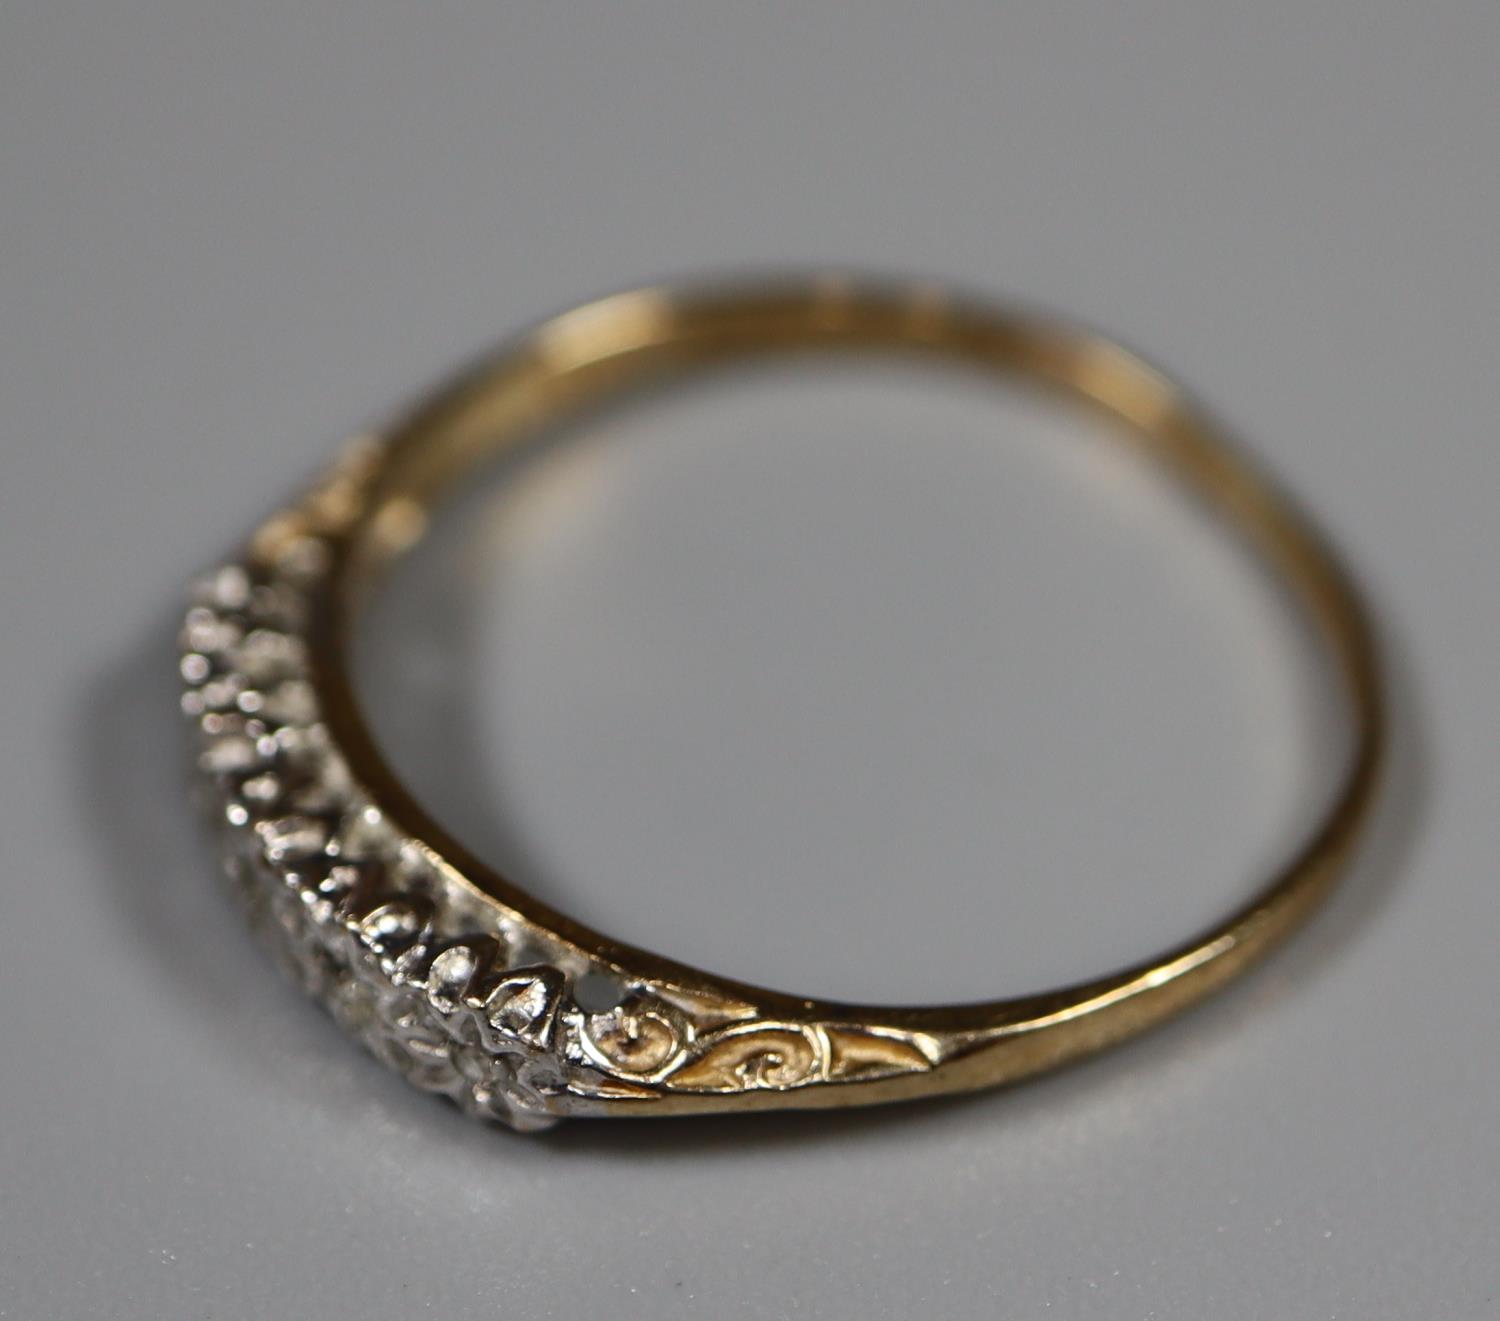 9ct gold diamond ring. Ring size Q. Approx weight 1.4 grams. (B.P. 21% + VAT) - Image 2 of 3